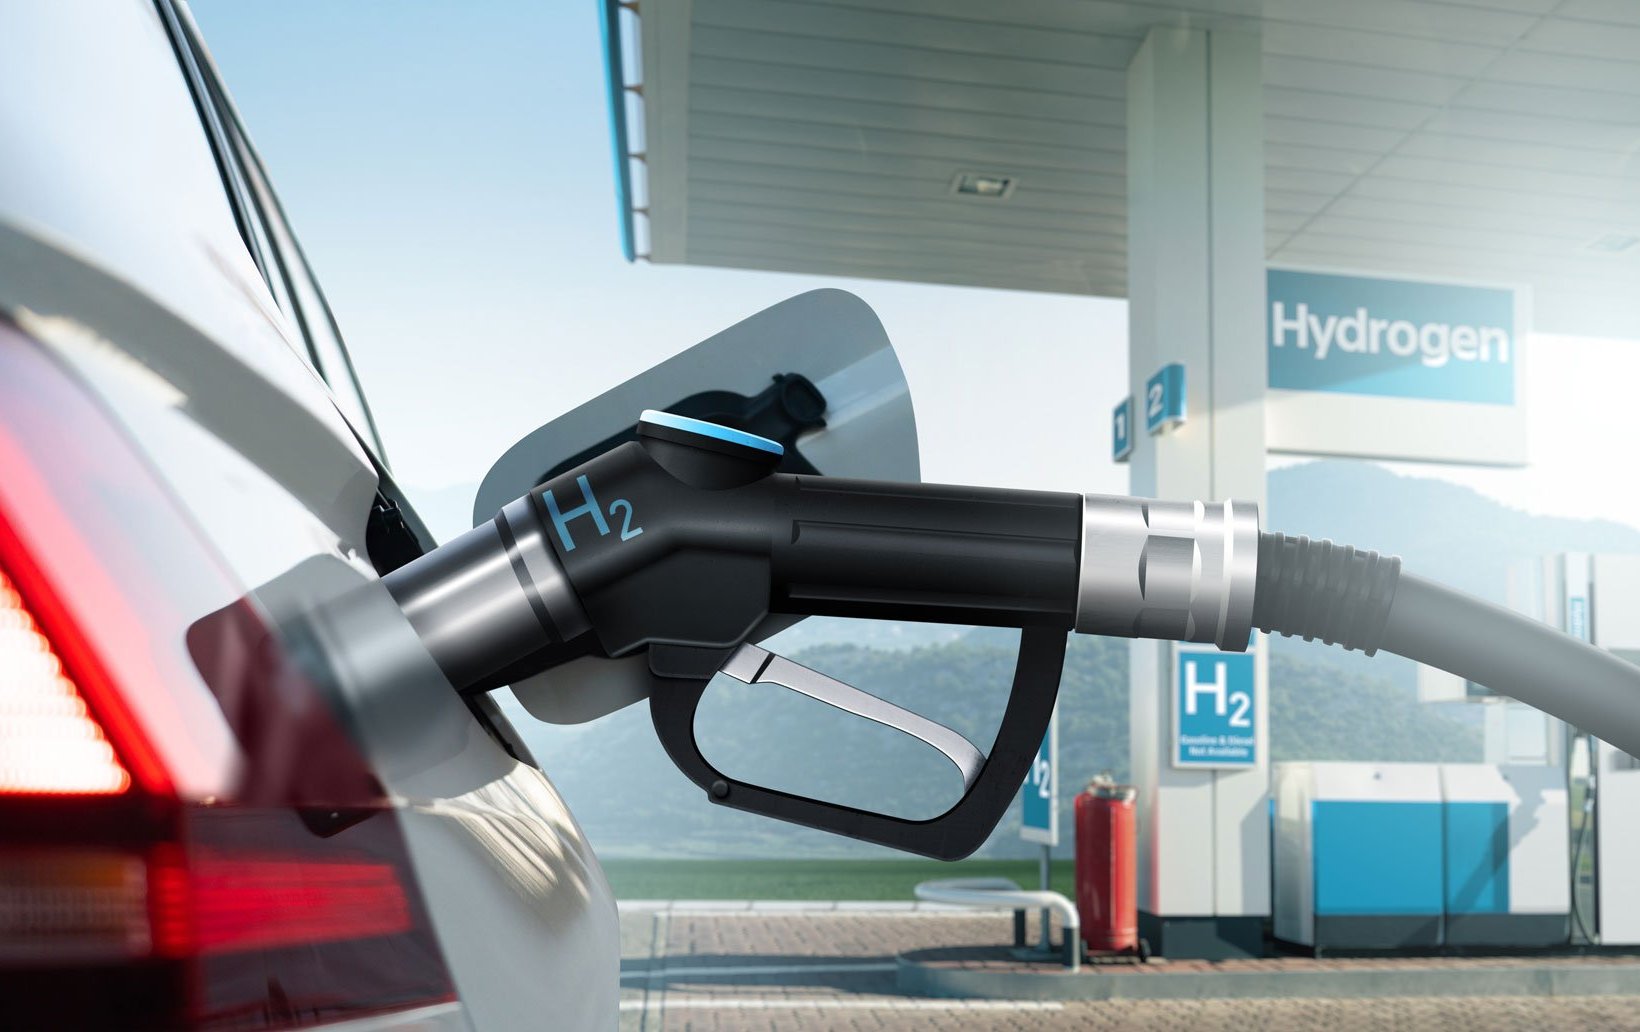 Car refueling with hydrogen